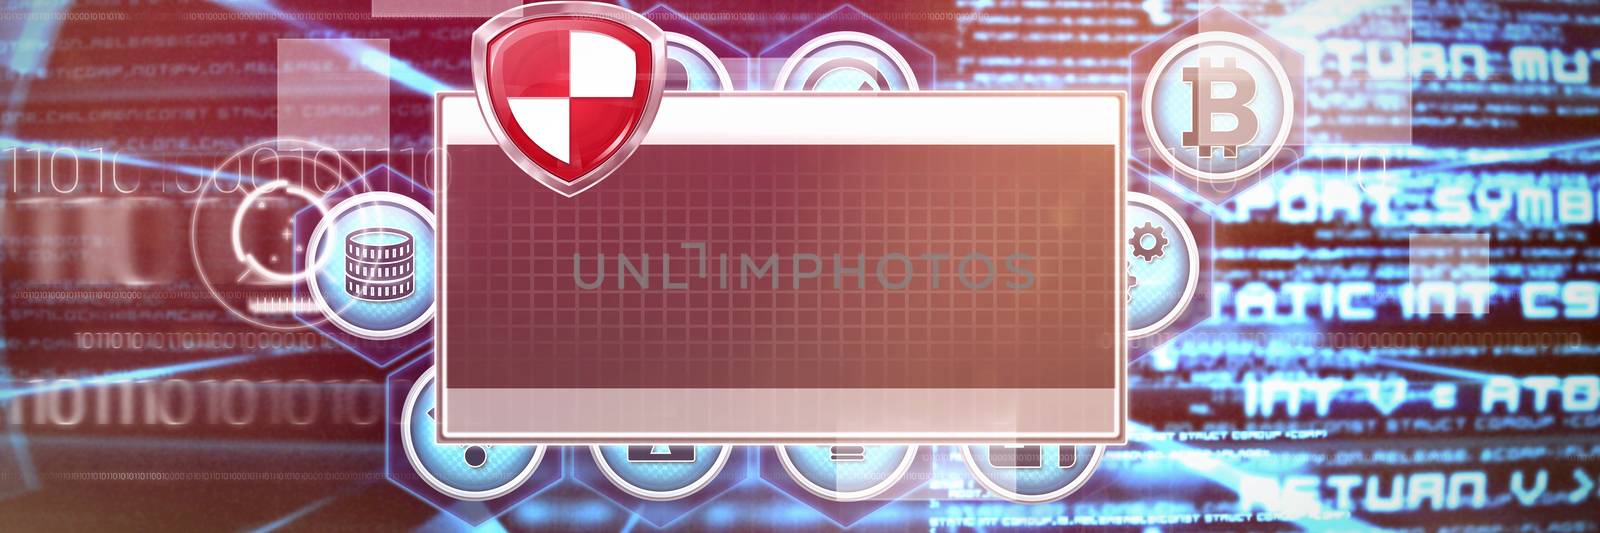 Red badge symbol against abstract blue text